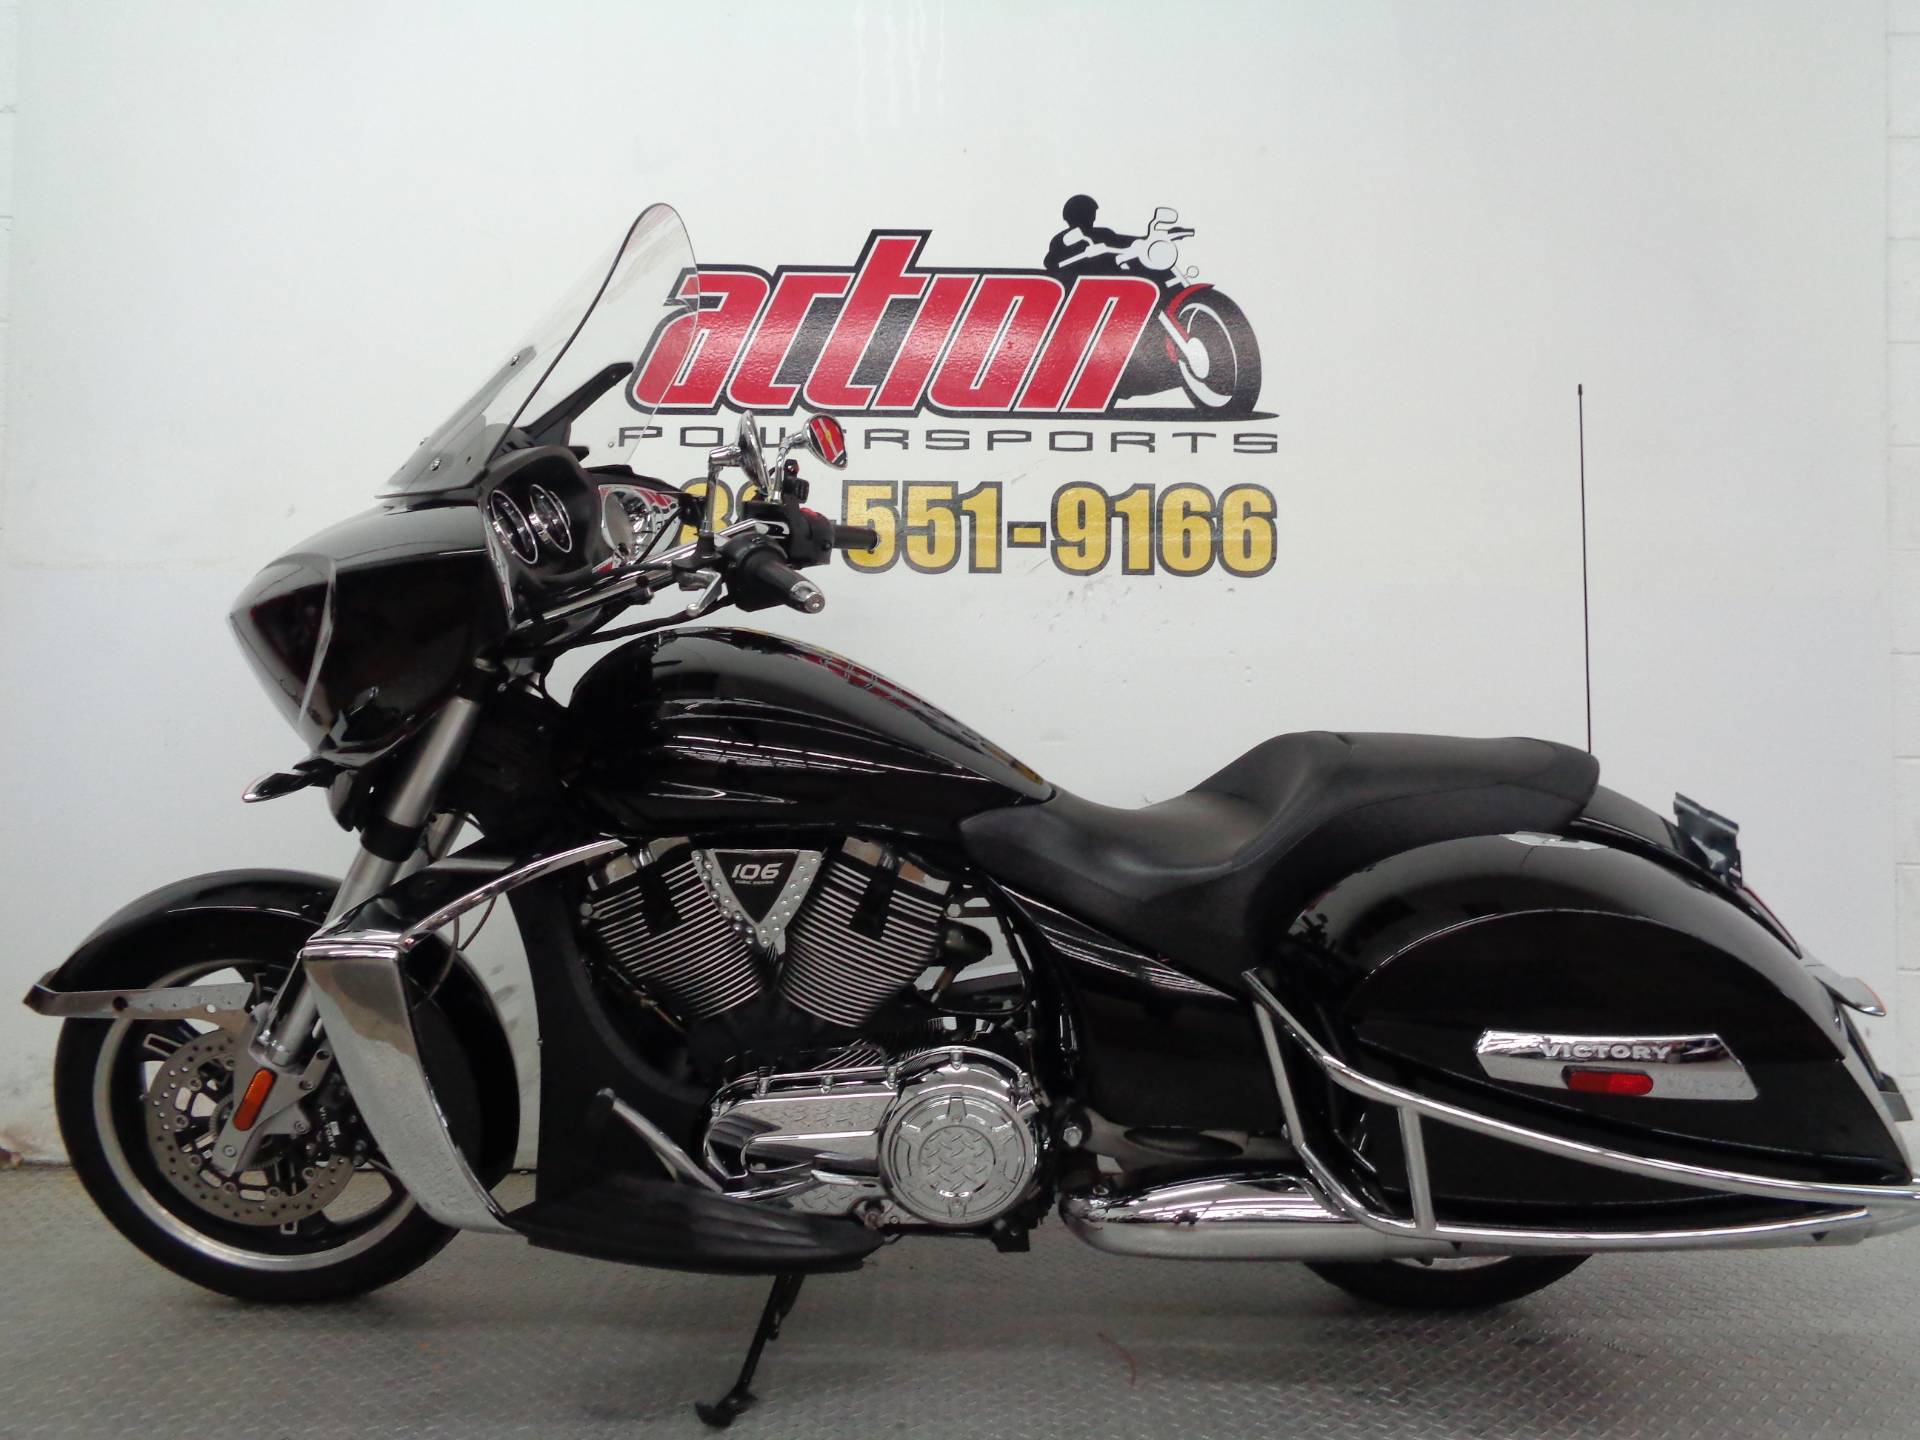 2013 victory cross country tour value